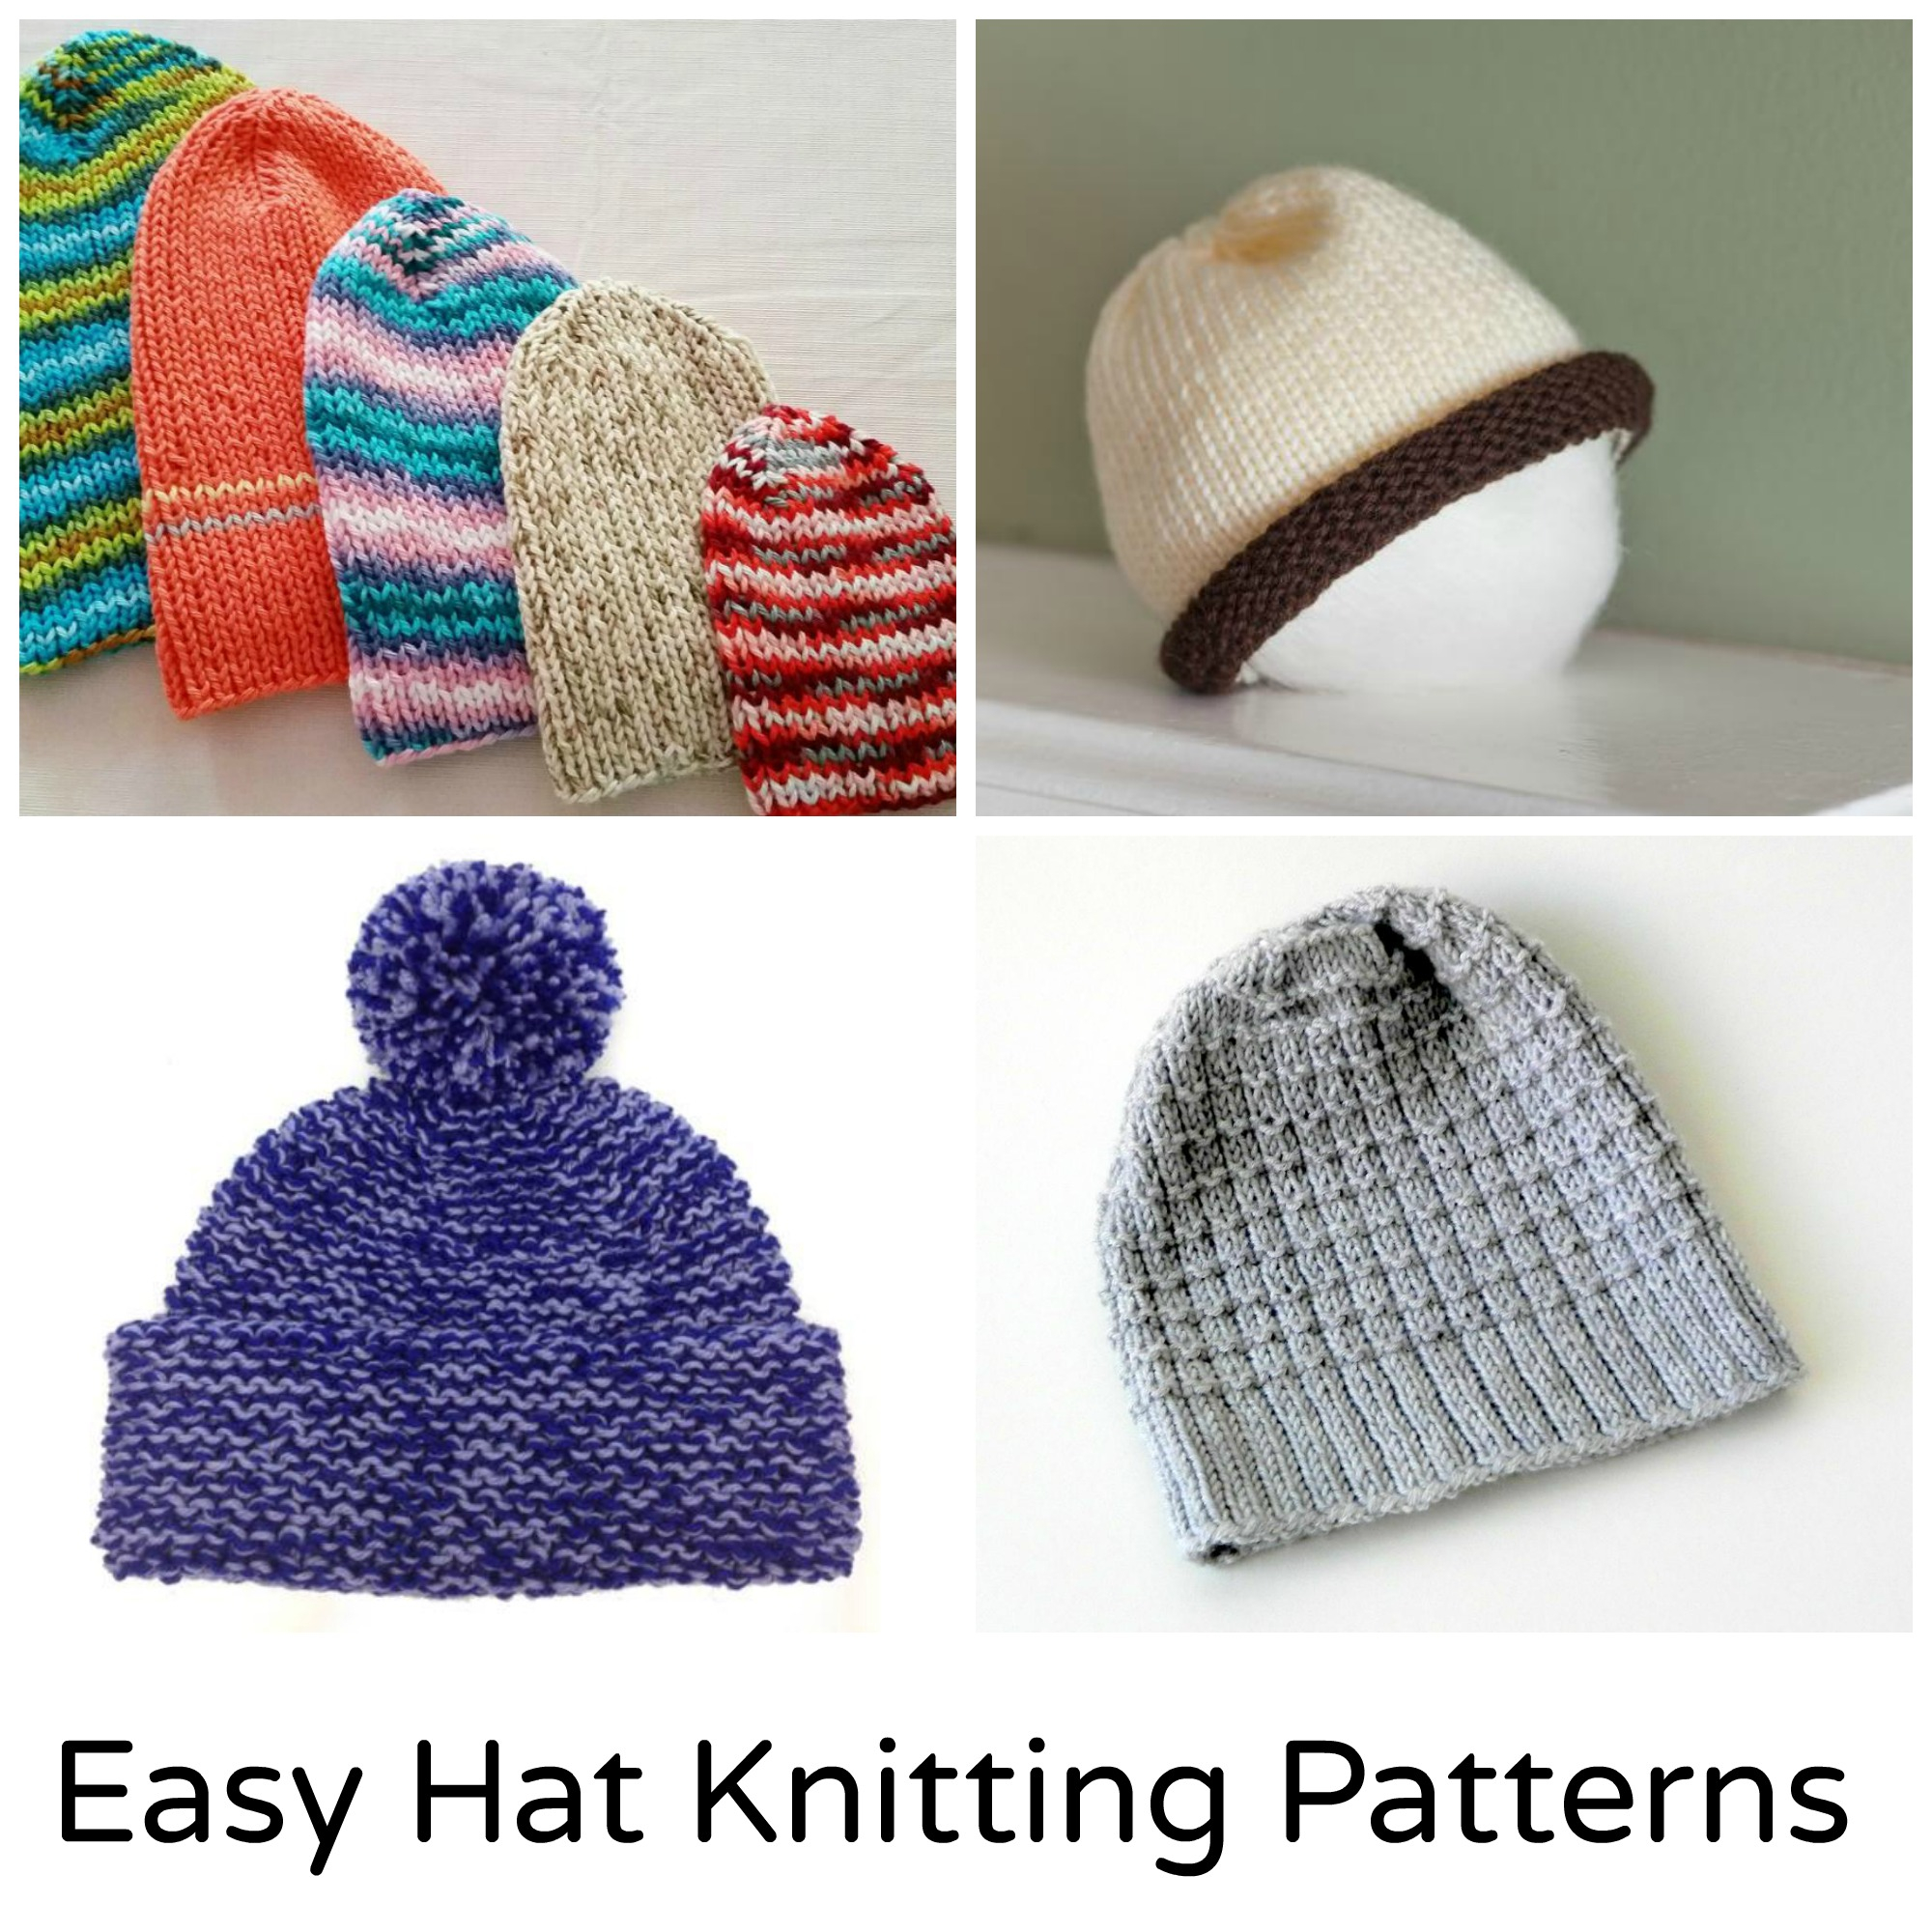 Bobble Hat Knitting Pattern Free Easy Knitting Patterns For Hats Free